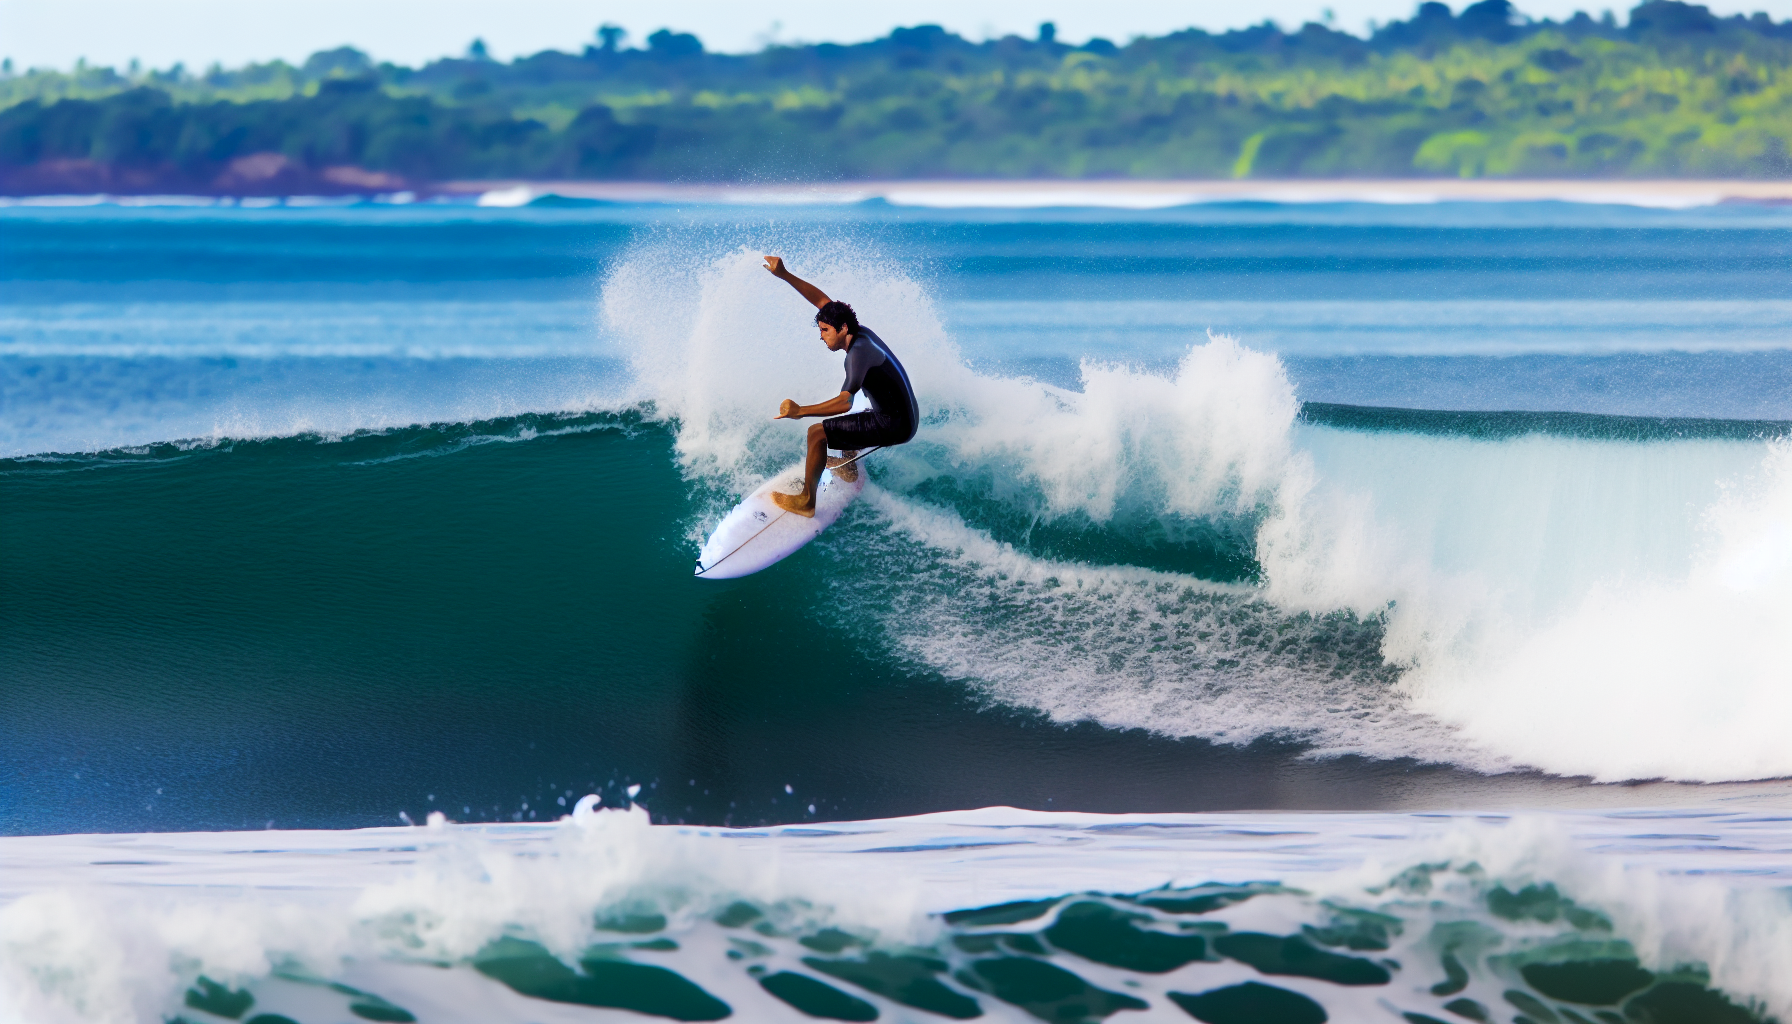 Surfer riding a powerful wave on Costa Rica's Caribbean Coast